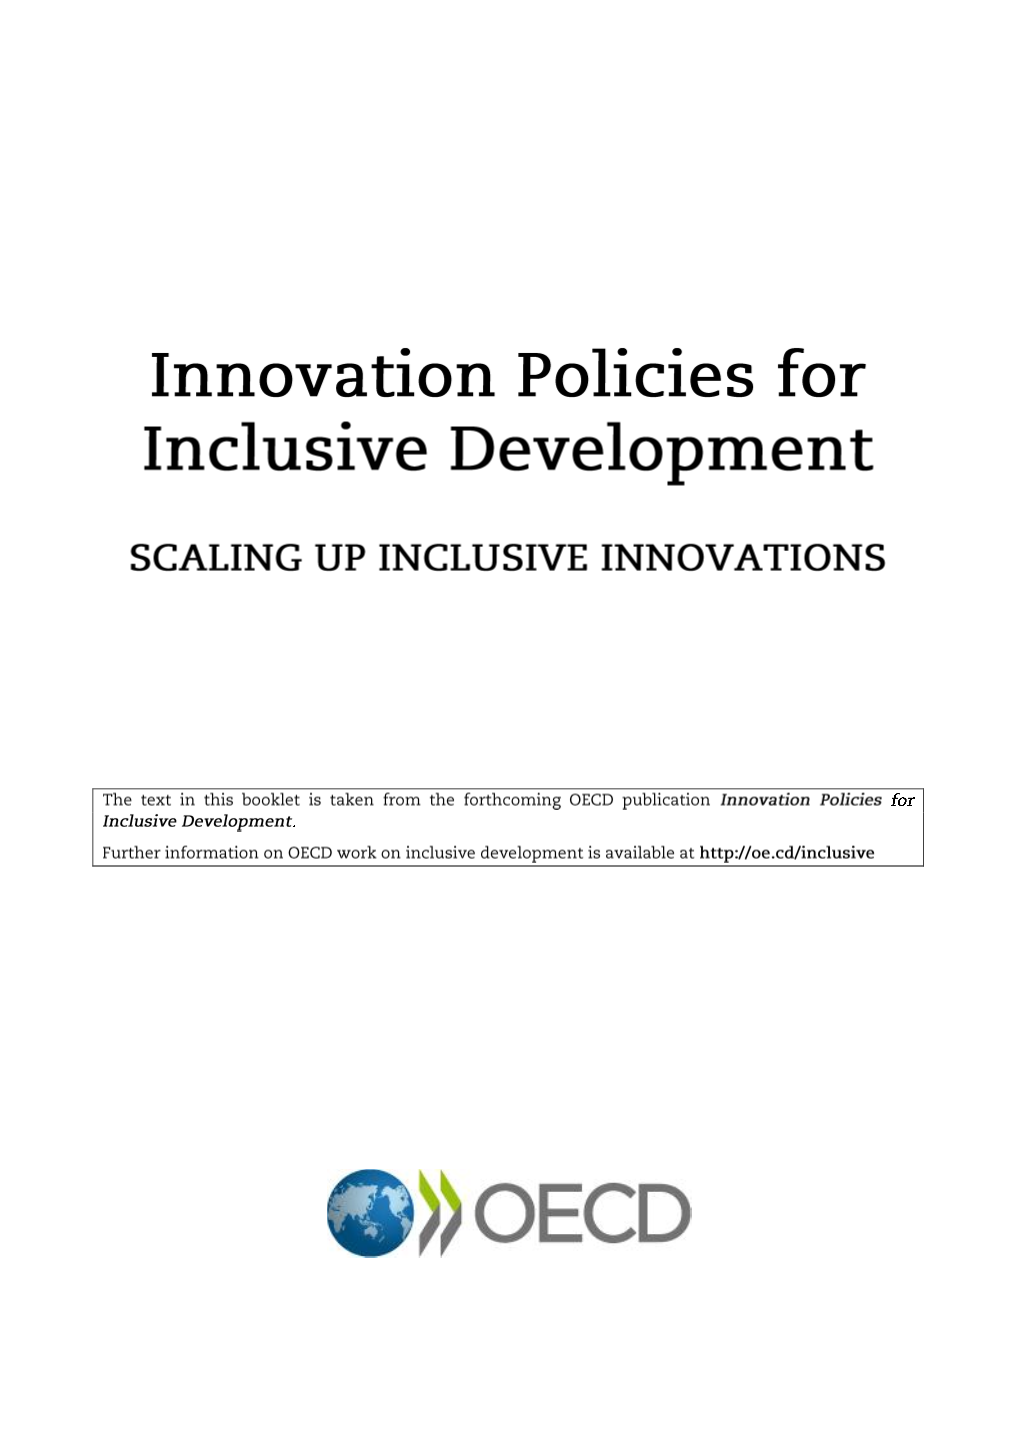 Innovation Policies for Inclusive Development: Scaling up Inclusive Innovations